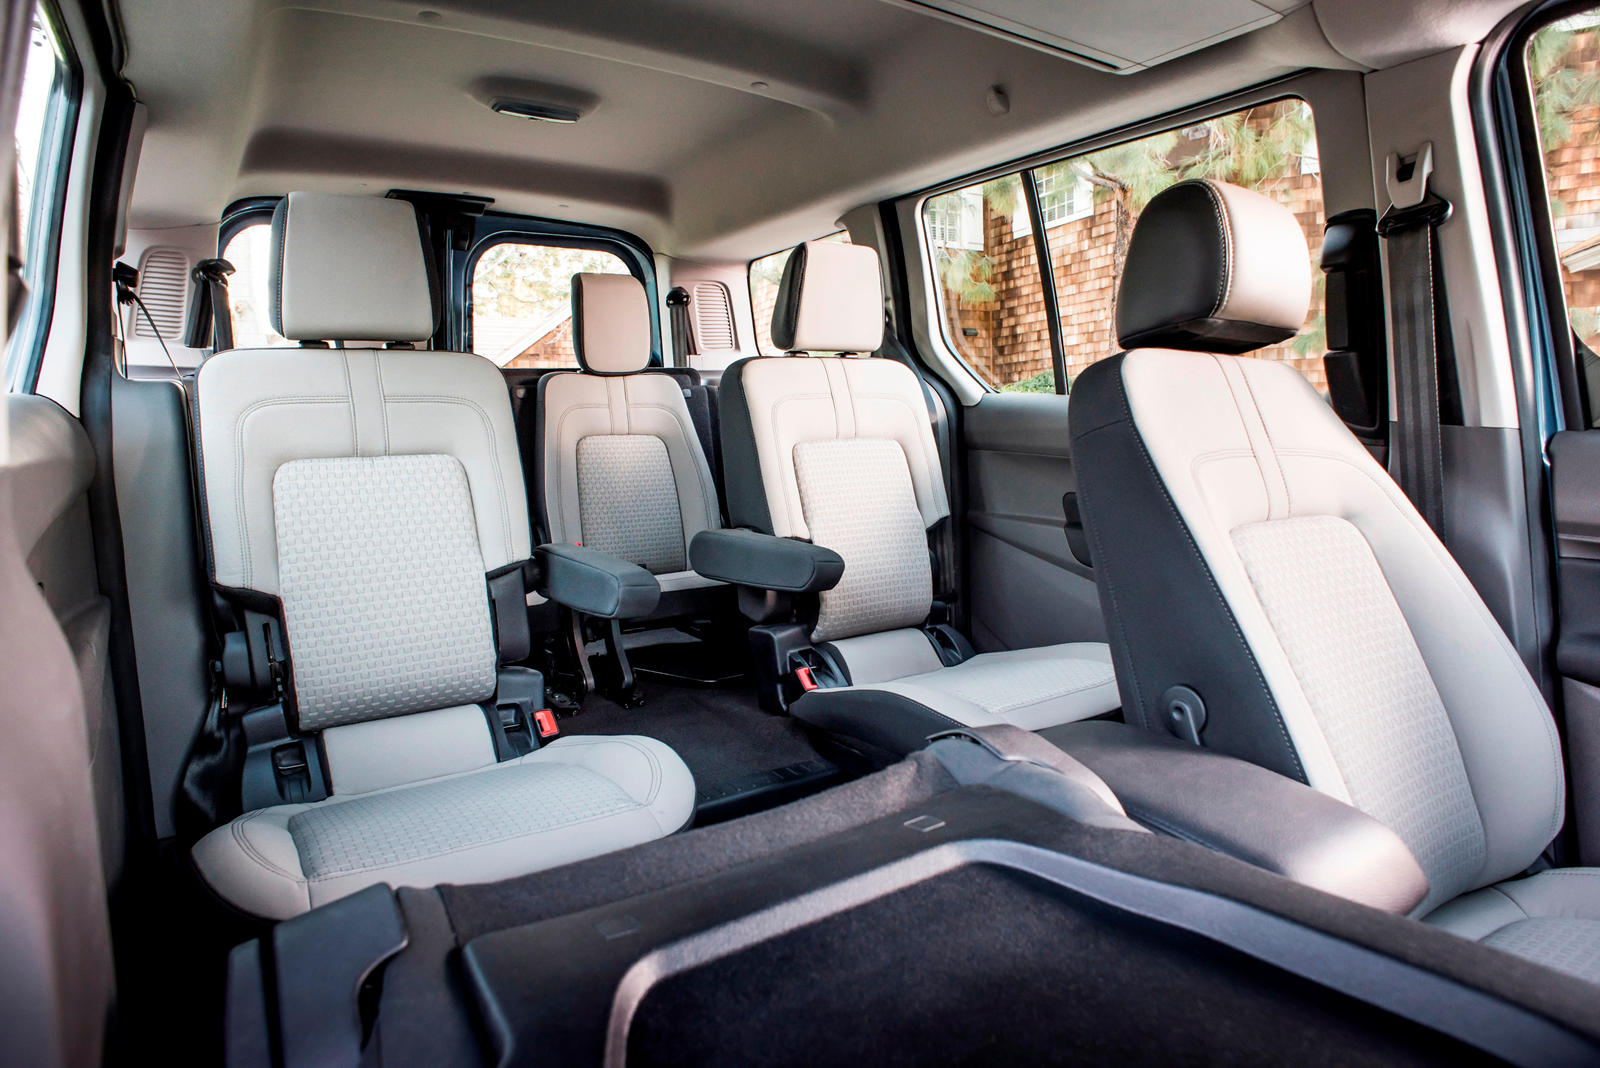 2023 Ford Transit Connect Passenger Wagon Interior Dimensions: Seating,  Cargo Space & Trunk Size - Photos | CarBuzz